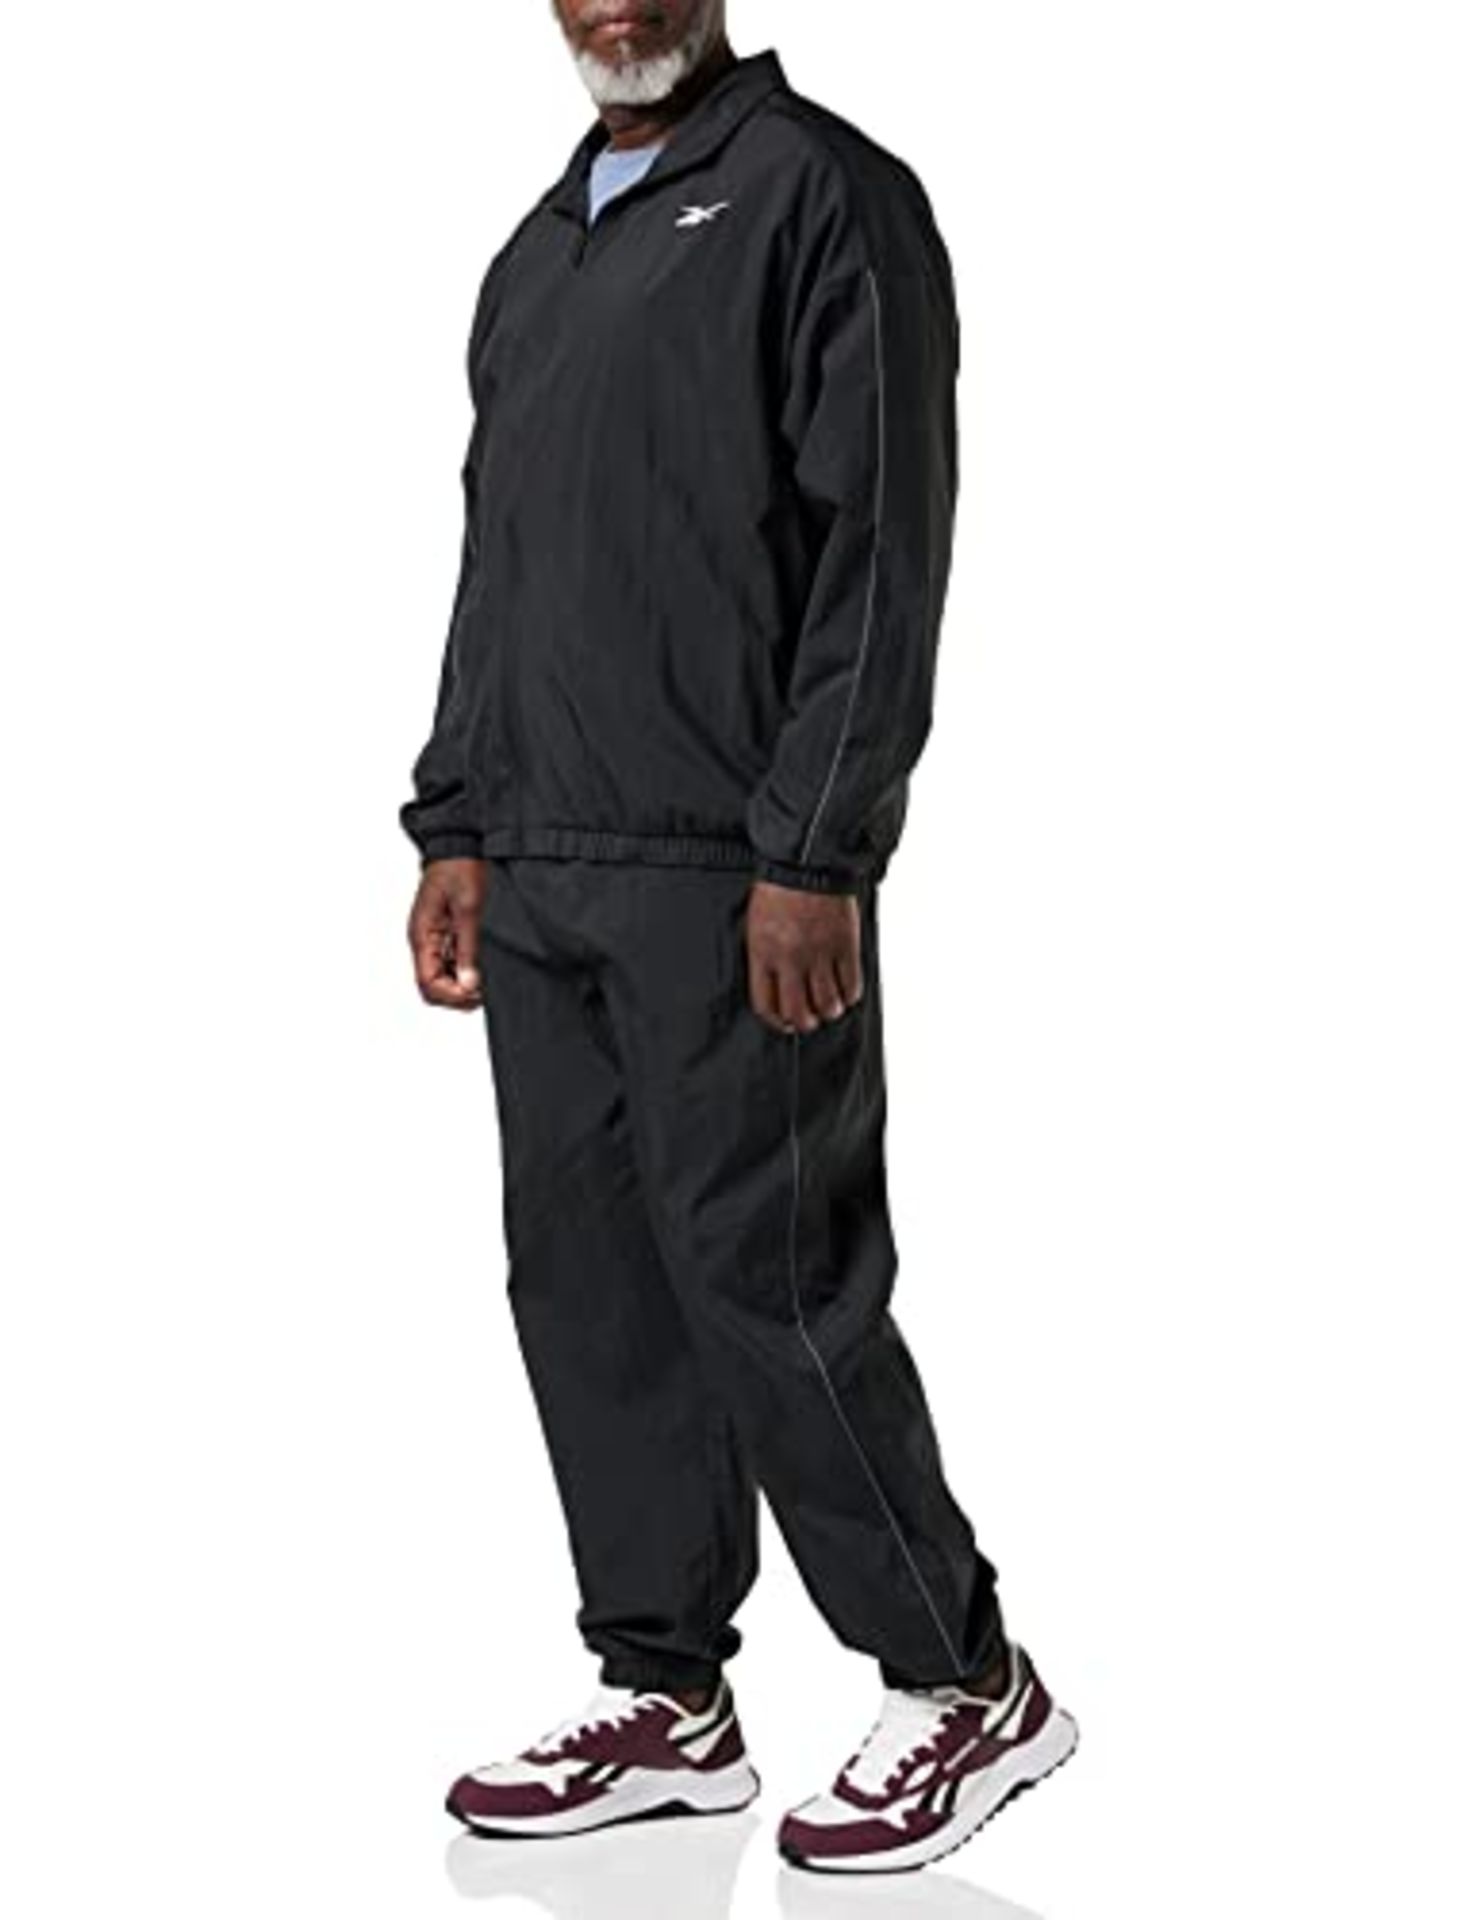 RRP £51.00 Reebok Training Track Suit ready for workout